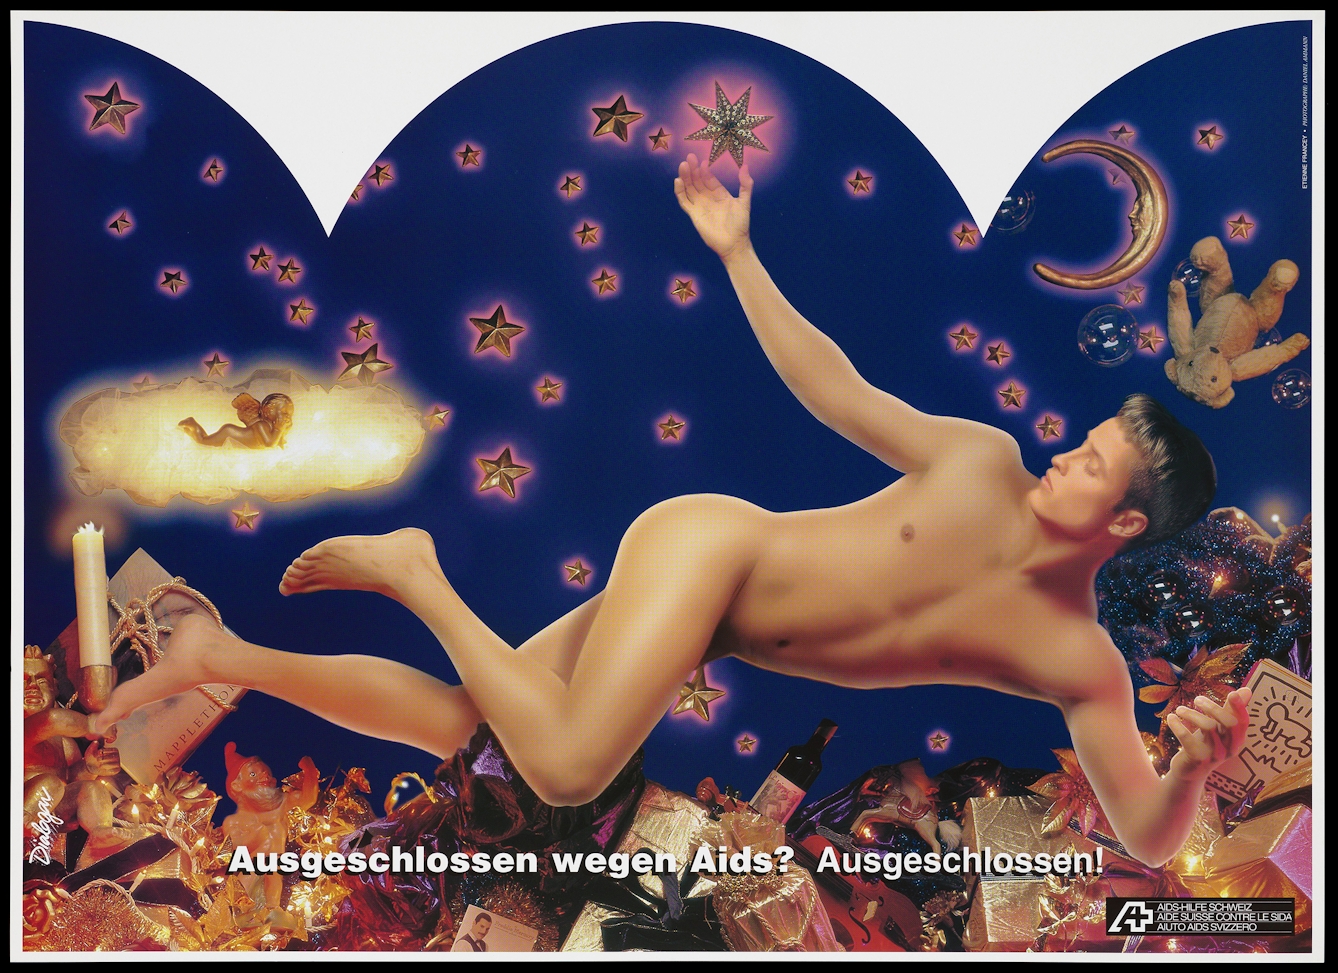 Poster print of a naked young man floating in front of a deep blue backgroud of gold stars, moon and cherub. Below him is a profusion of wrapped gifts, wine, candles and baubles including a drawing by Keith Haring, a book by Robert Mapplethorpe and a photograph of Freddy Mercury. The tedxt at the bottom, in German, reads Ausgeshchlossen wegen Aids? Ausgeschlossen!